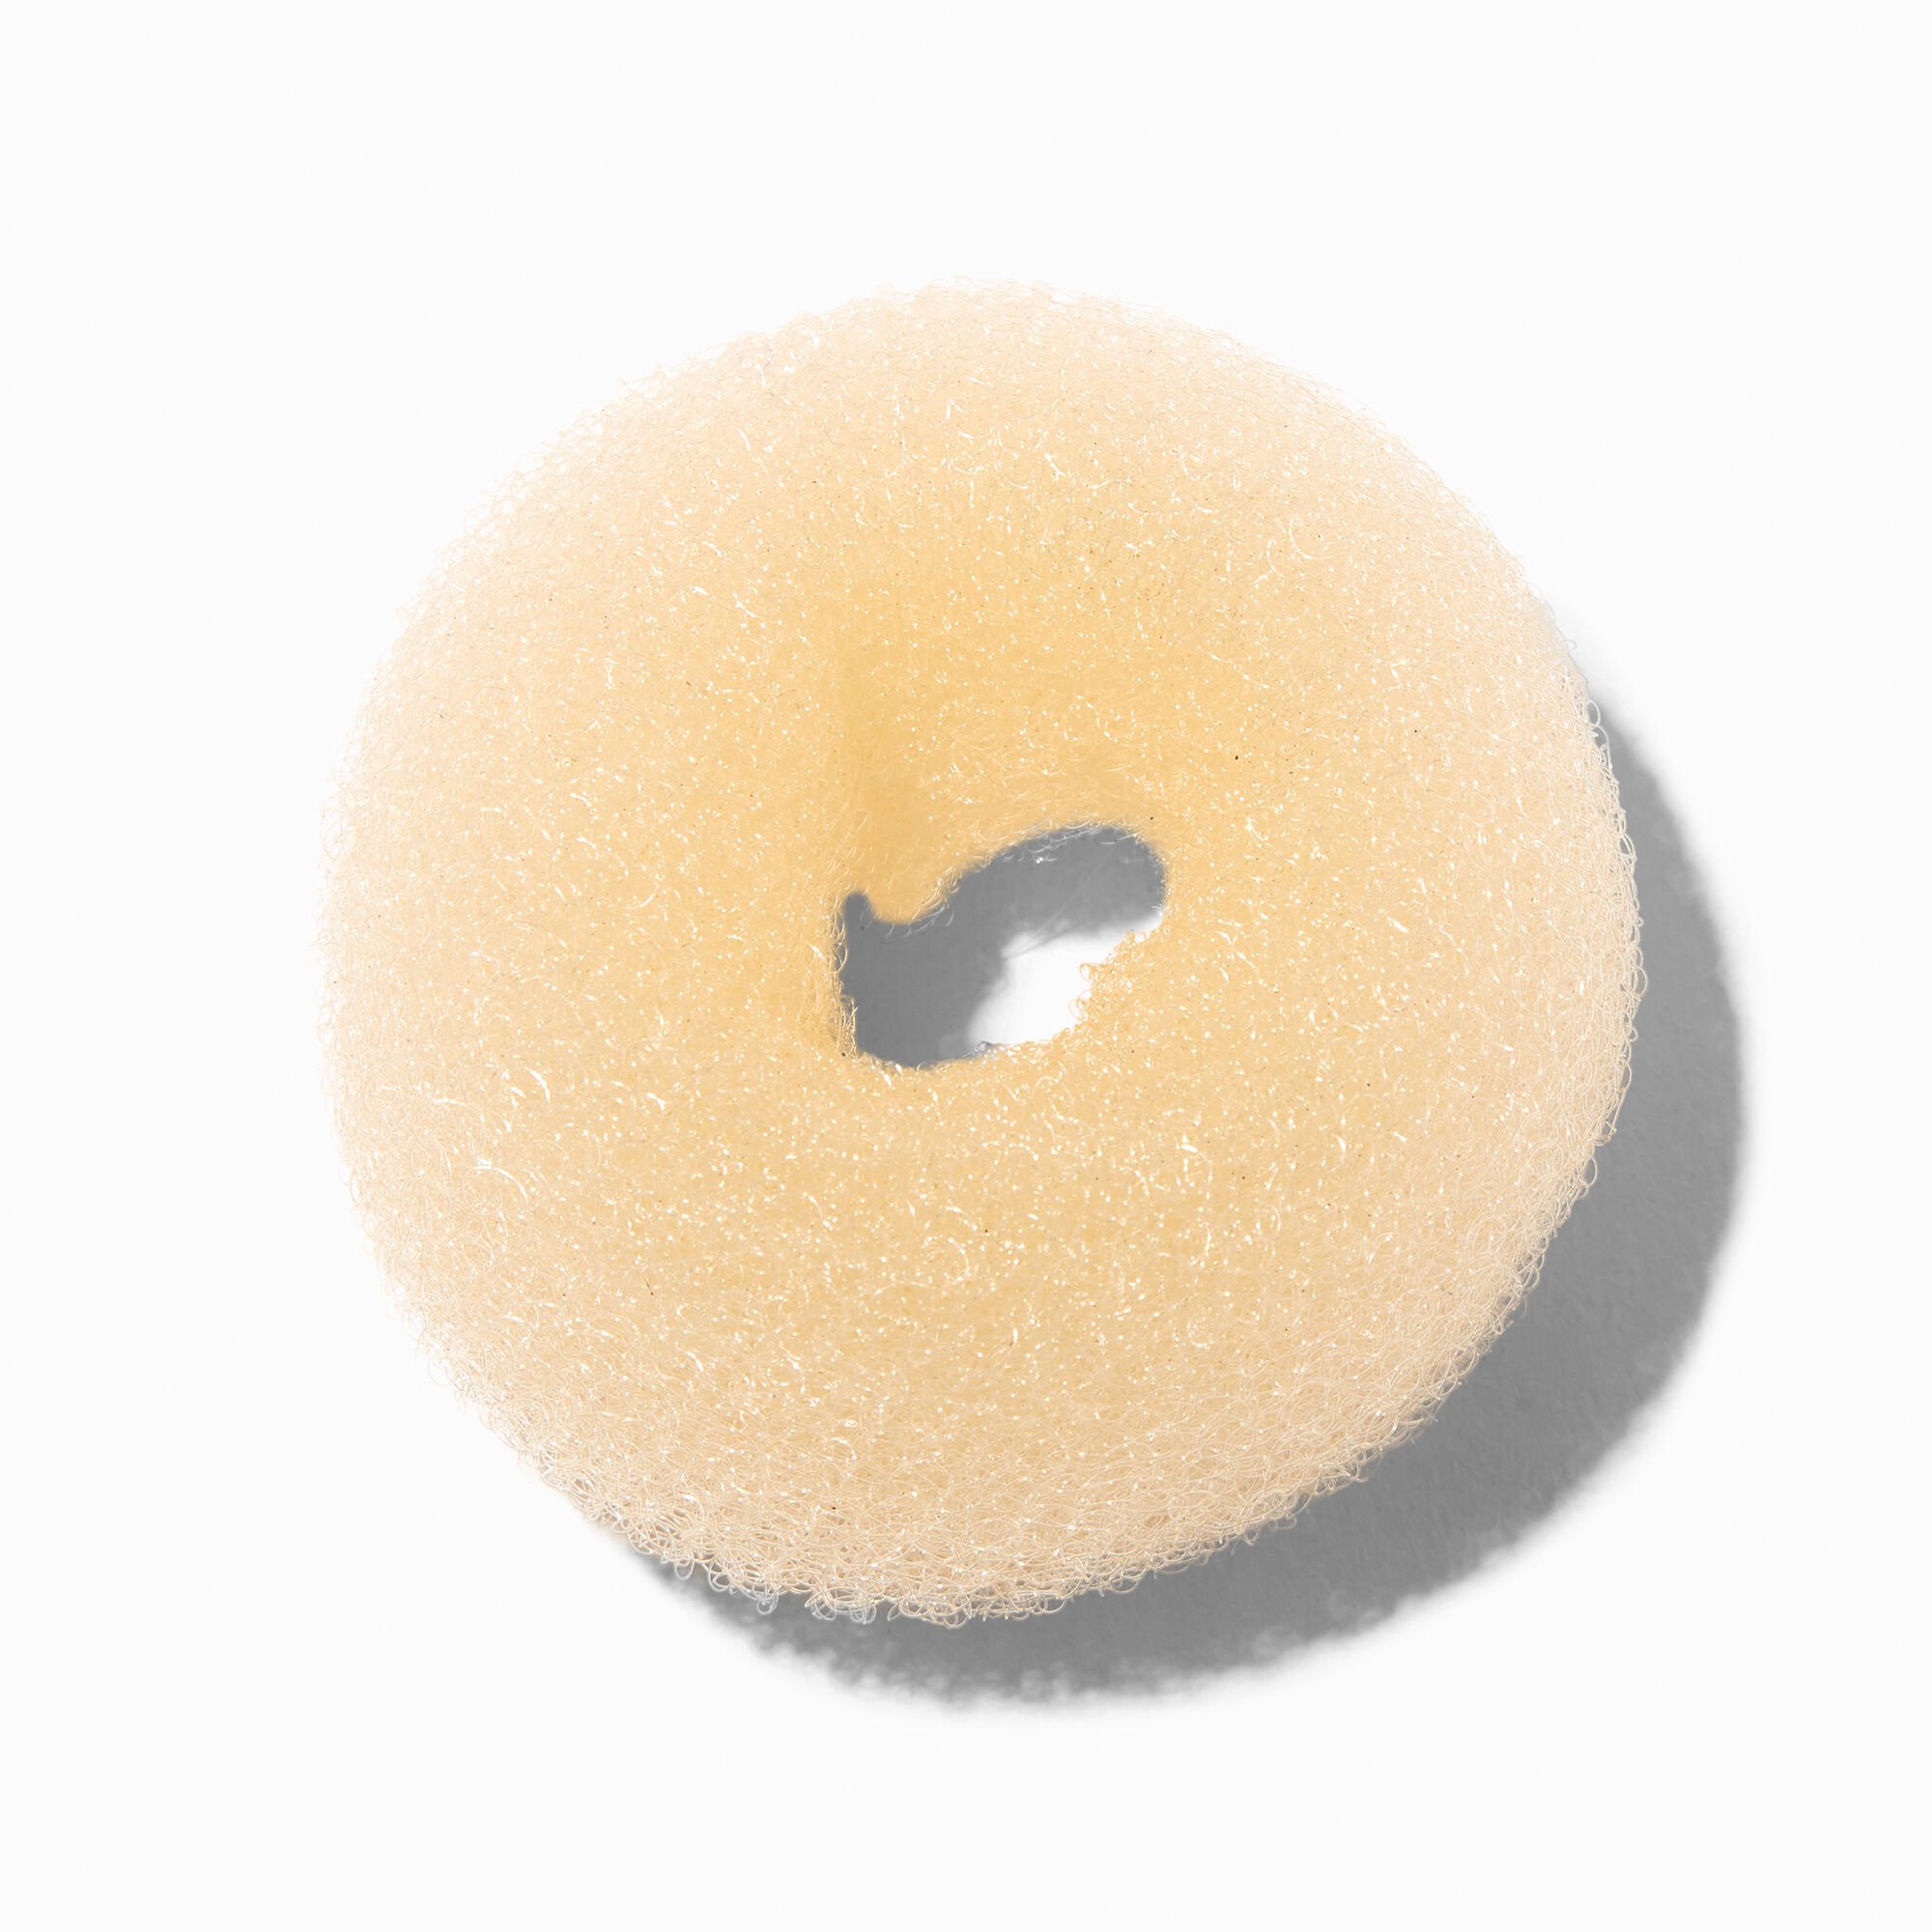 View Claires Small Blonde Hair Donut information